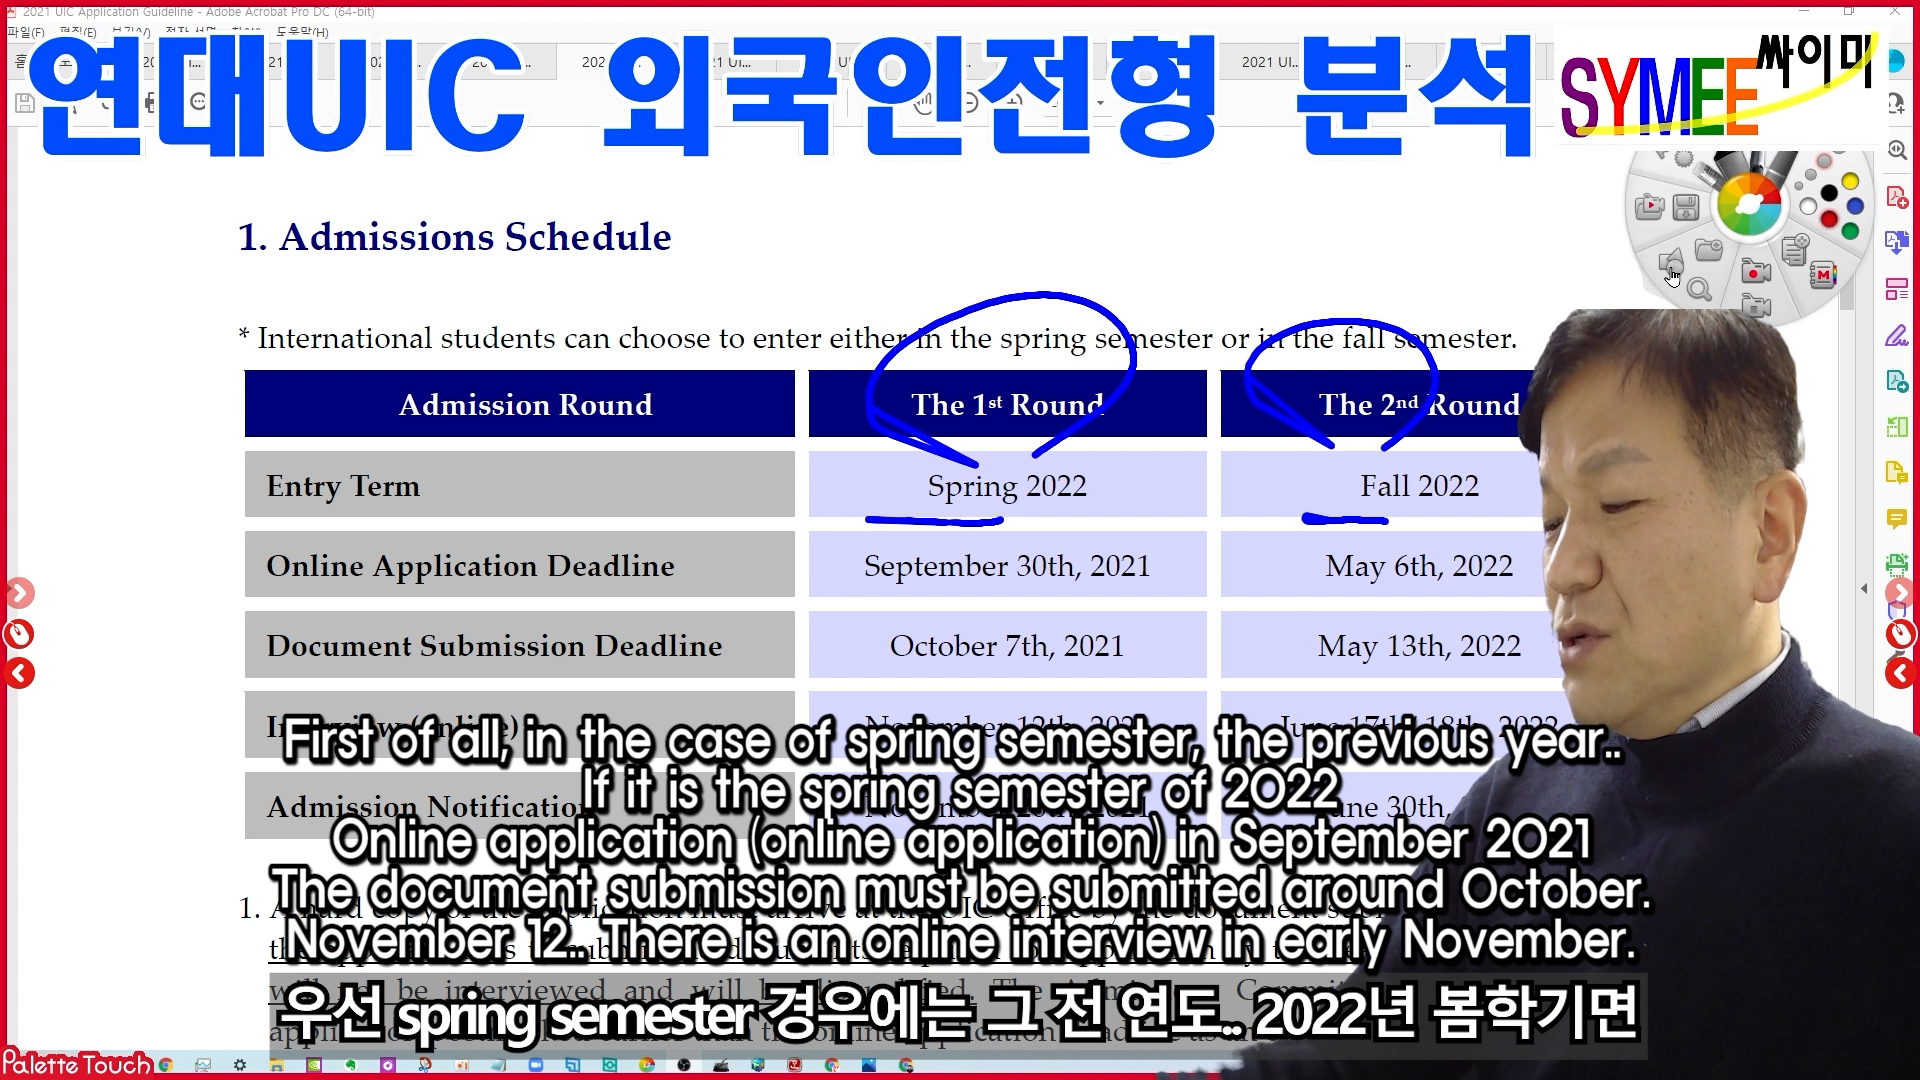 Yonsei Univ. Admission for UIC for Foreign Student 03 Admission Procedure.00_00_25_34.스틸 002.jpg